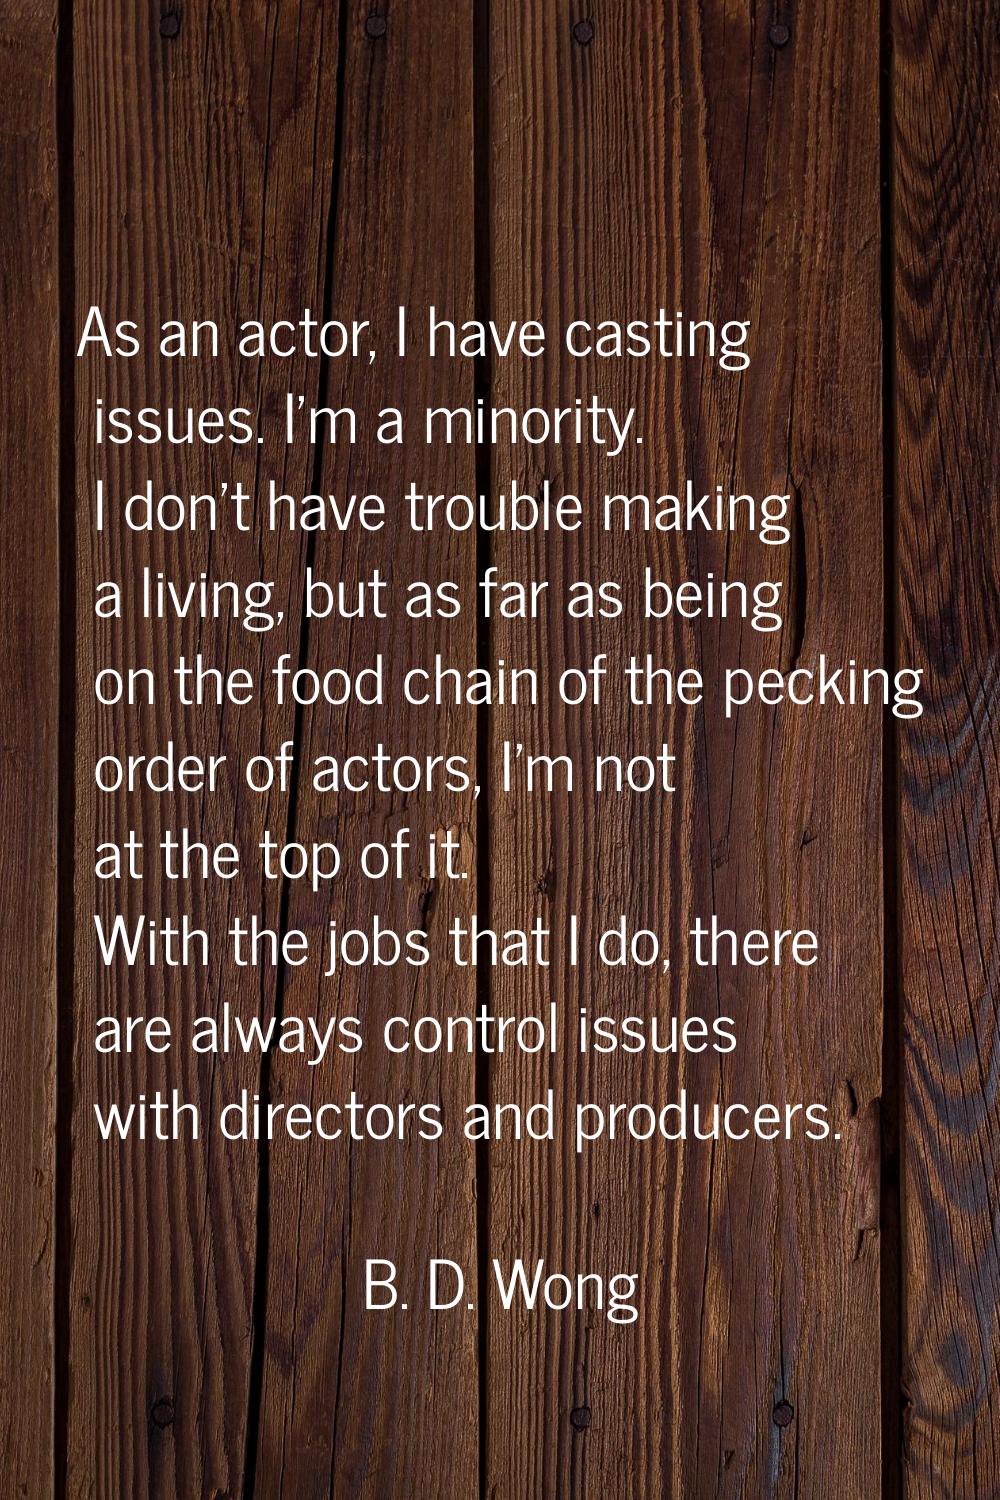 As an actor, I have casting issues. I'm a minority. I don't have trouble making a living, but as fa